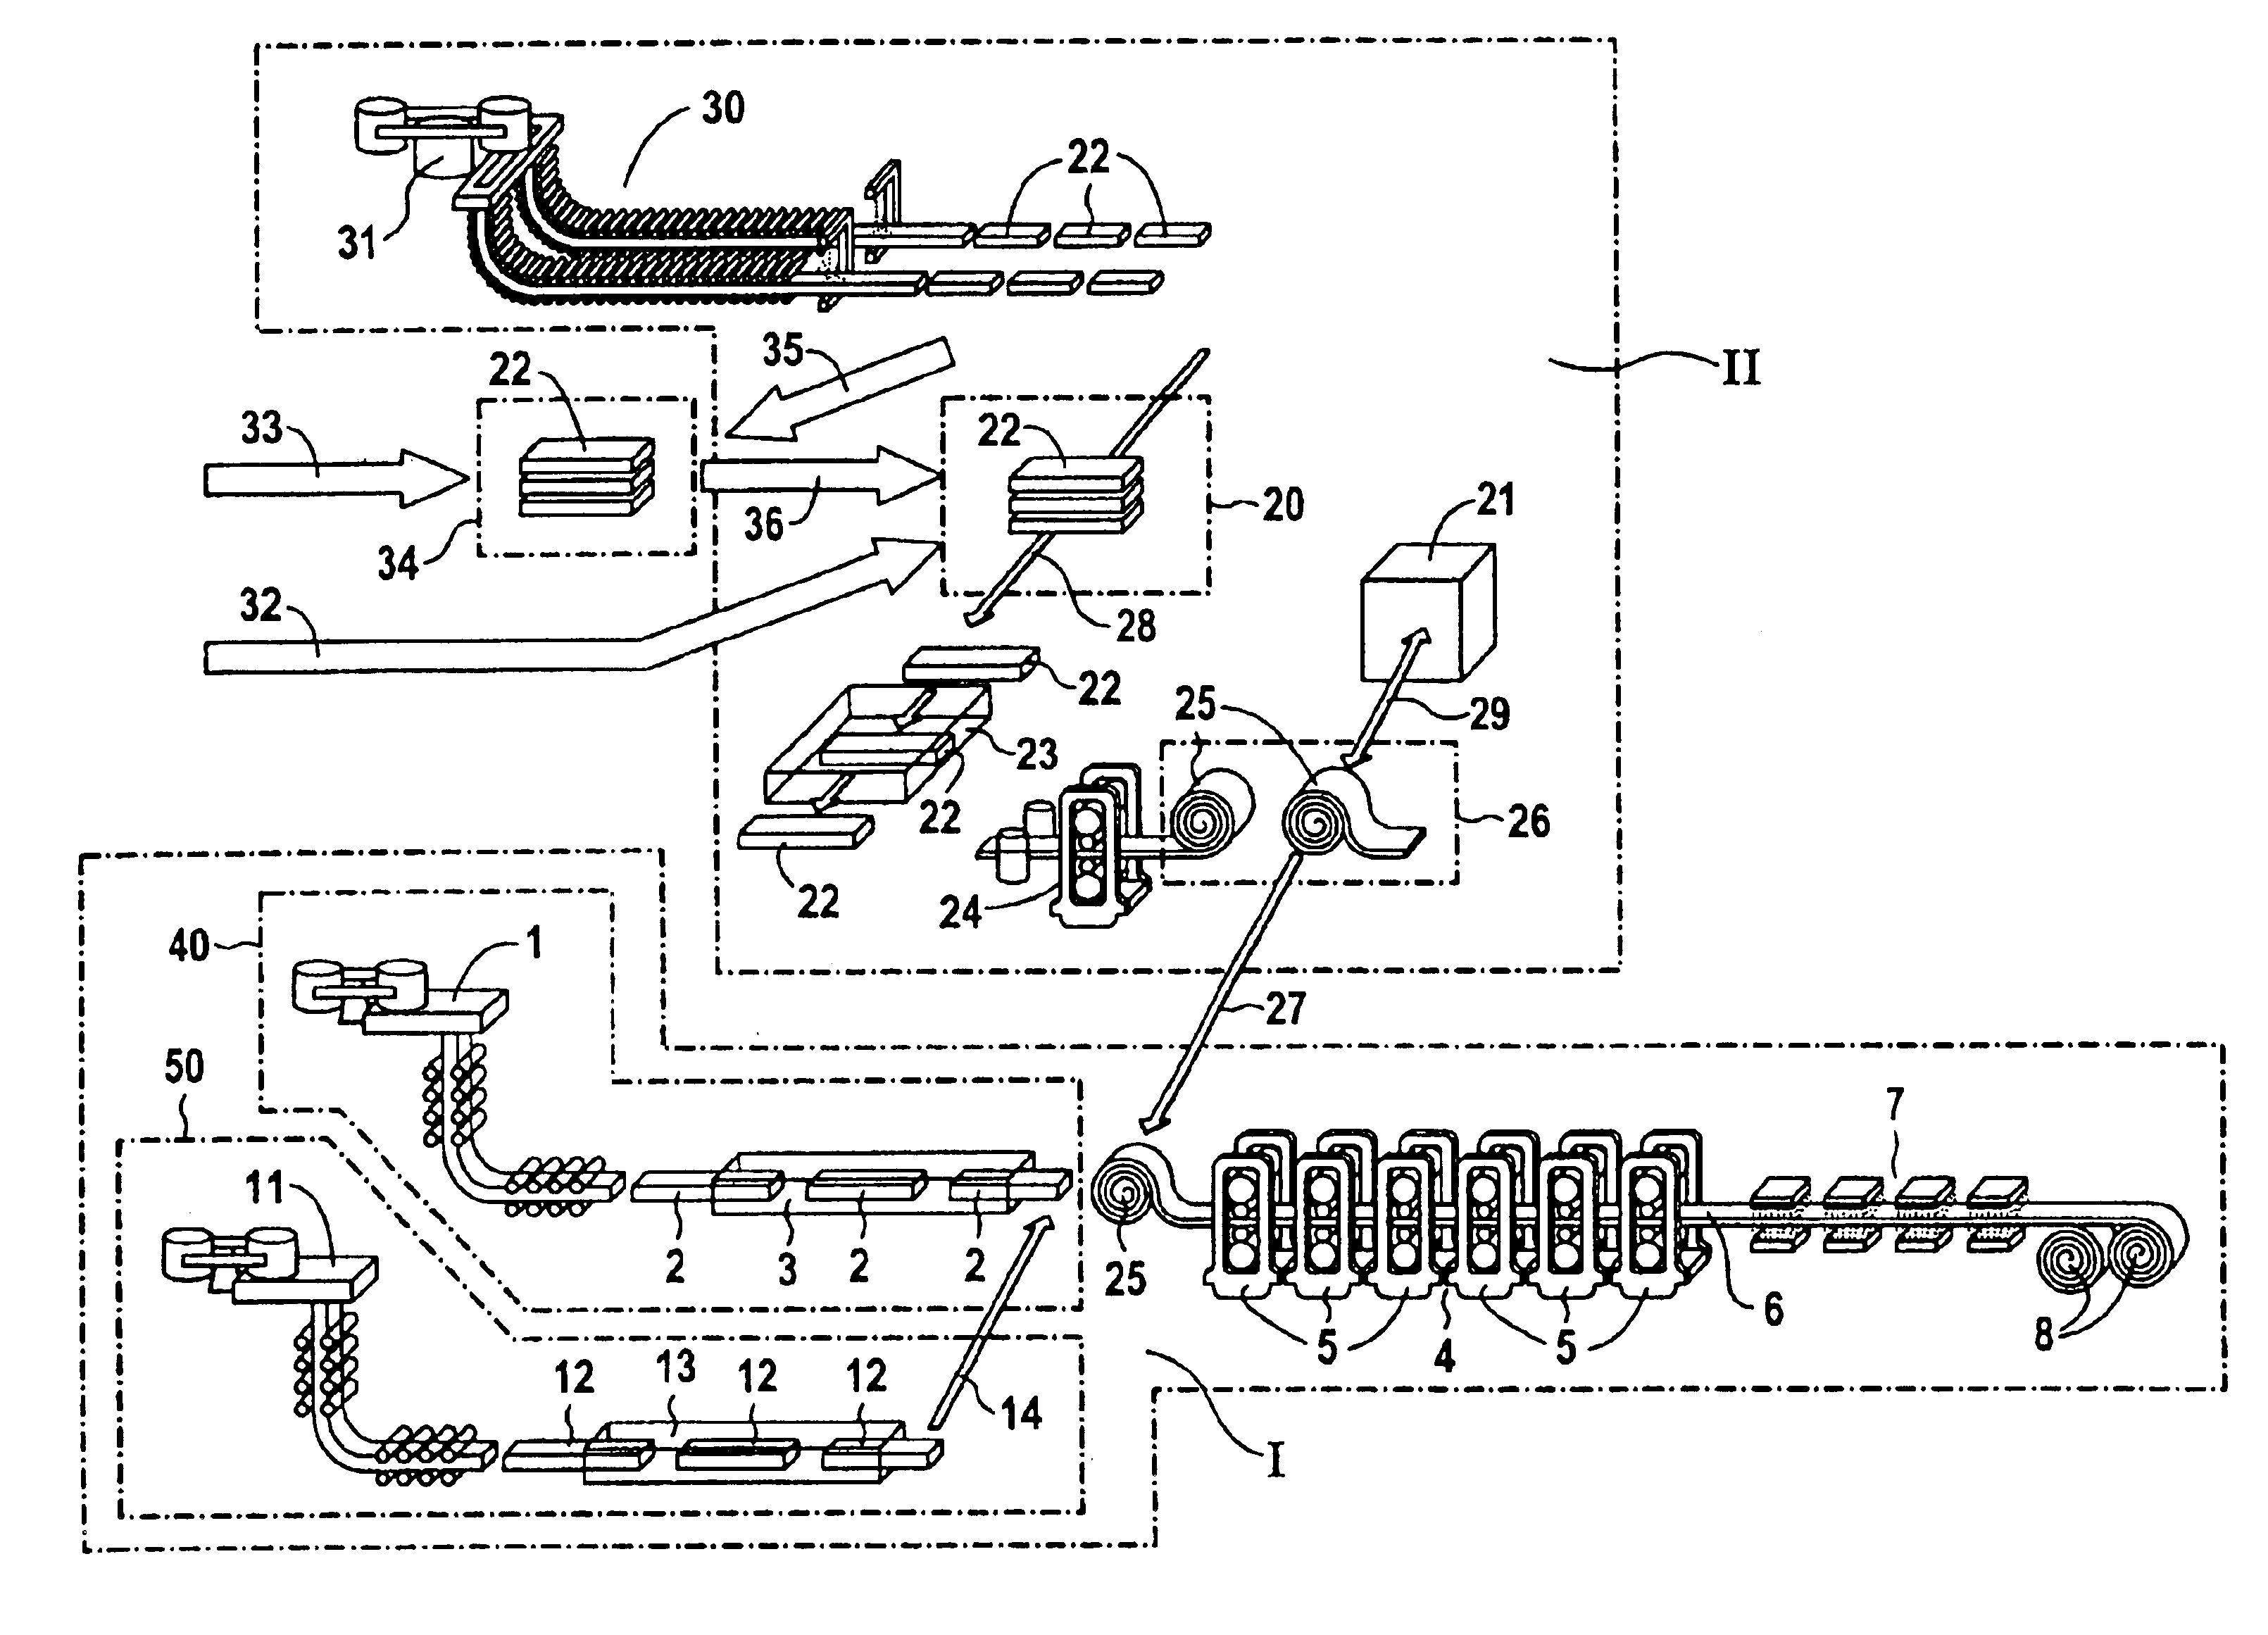 Method for operating a casting-rolling plant